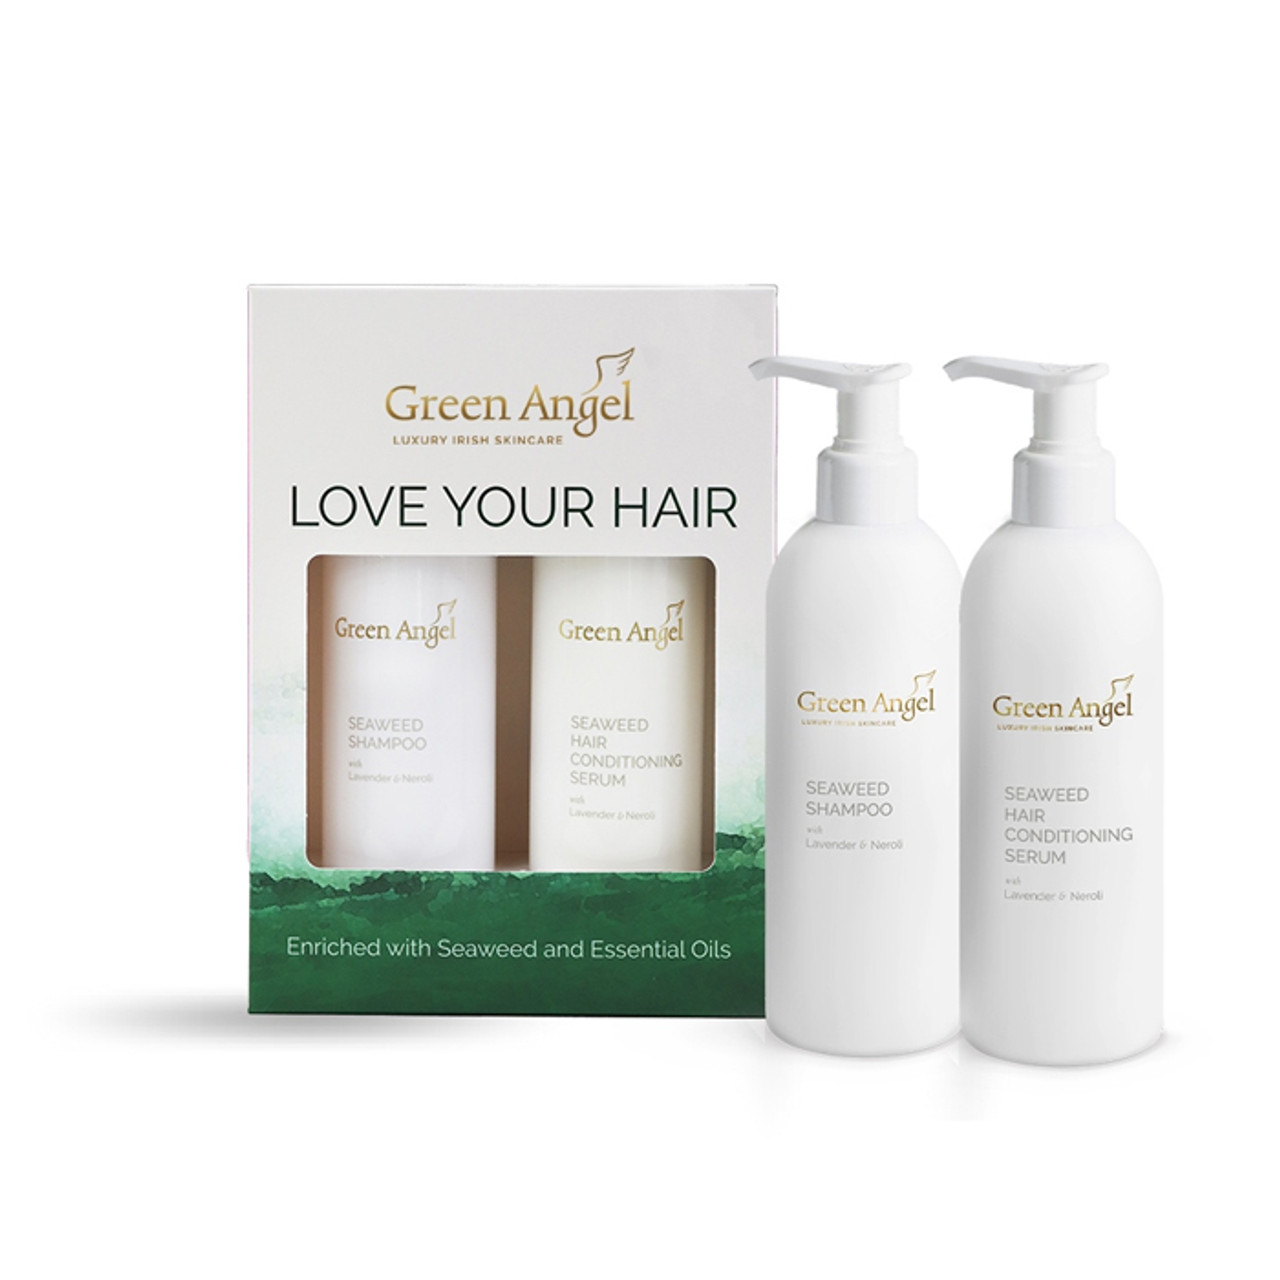 Love Your Hair - Promo pack